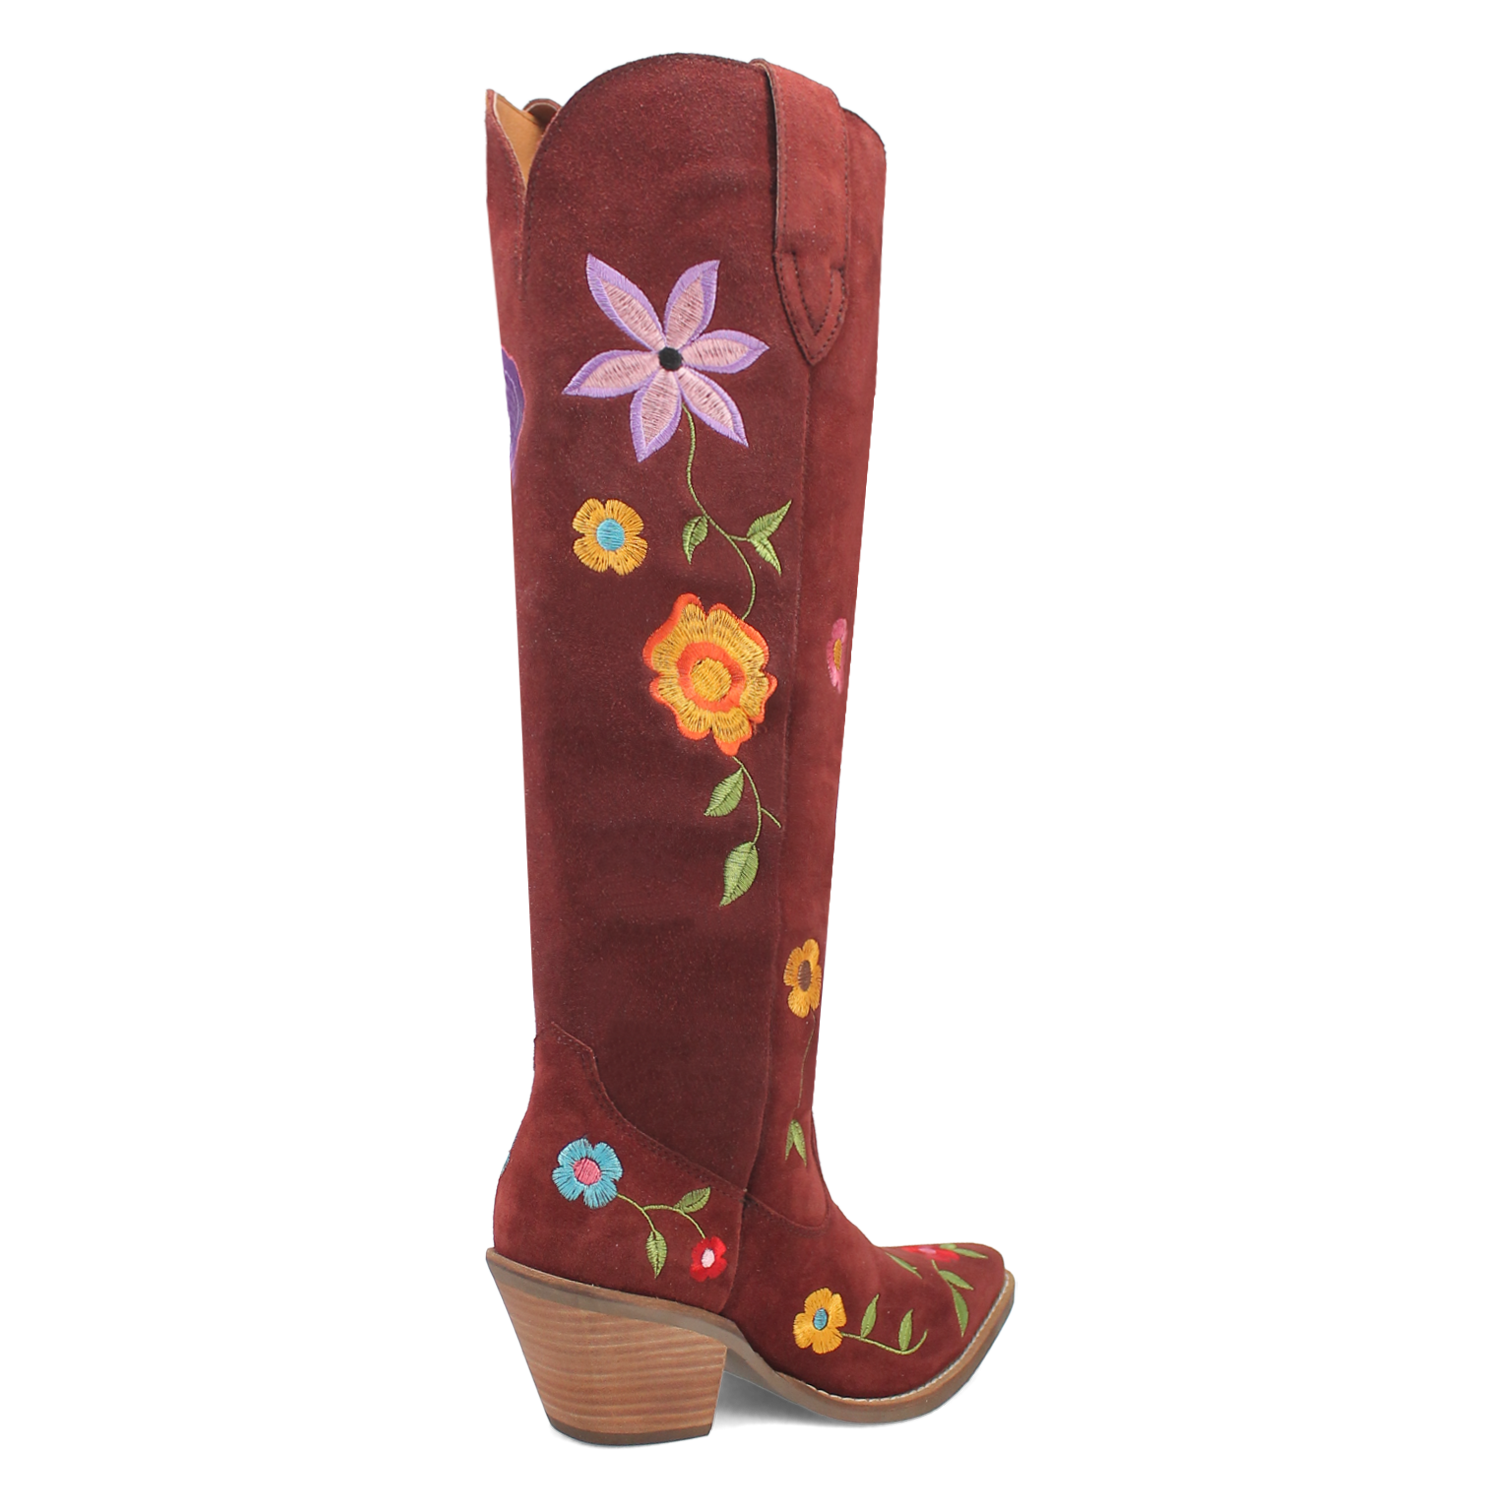 Flower Power Burgundy Suede & Floral Embroidered Boot (DS)